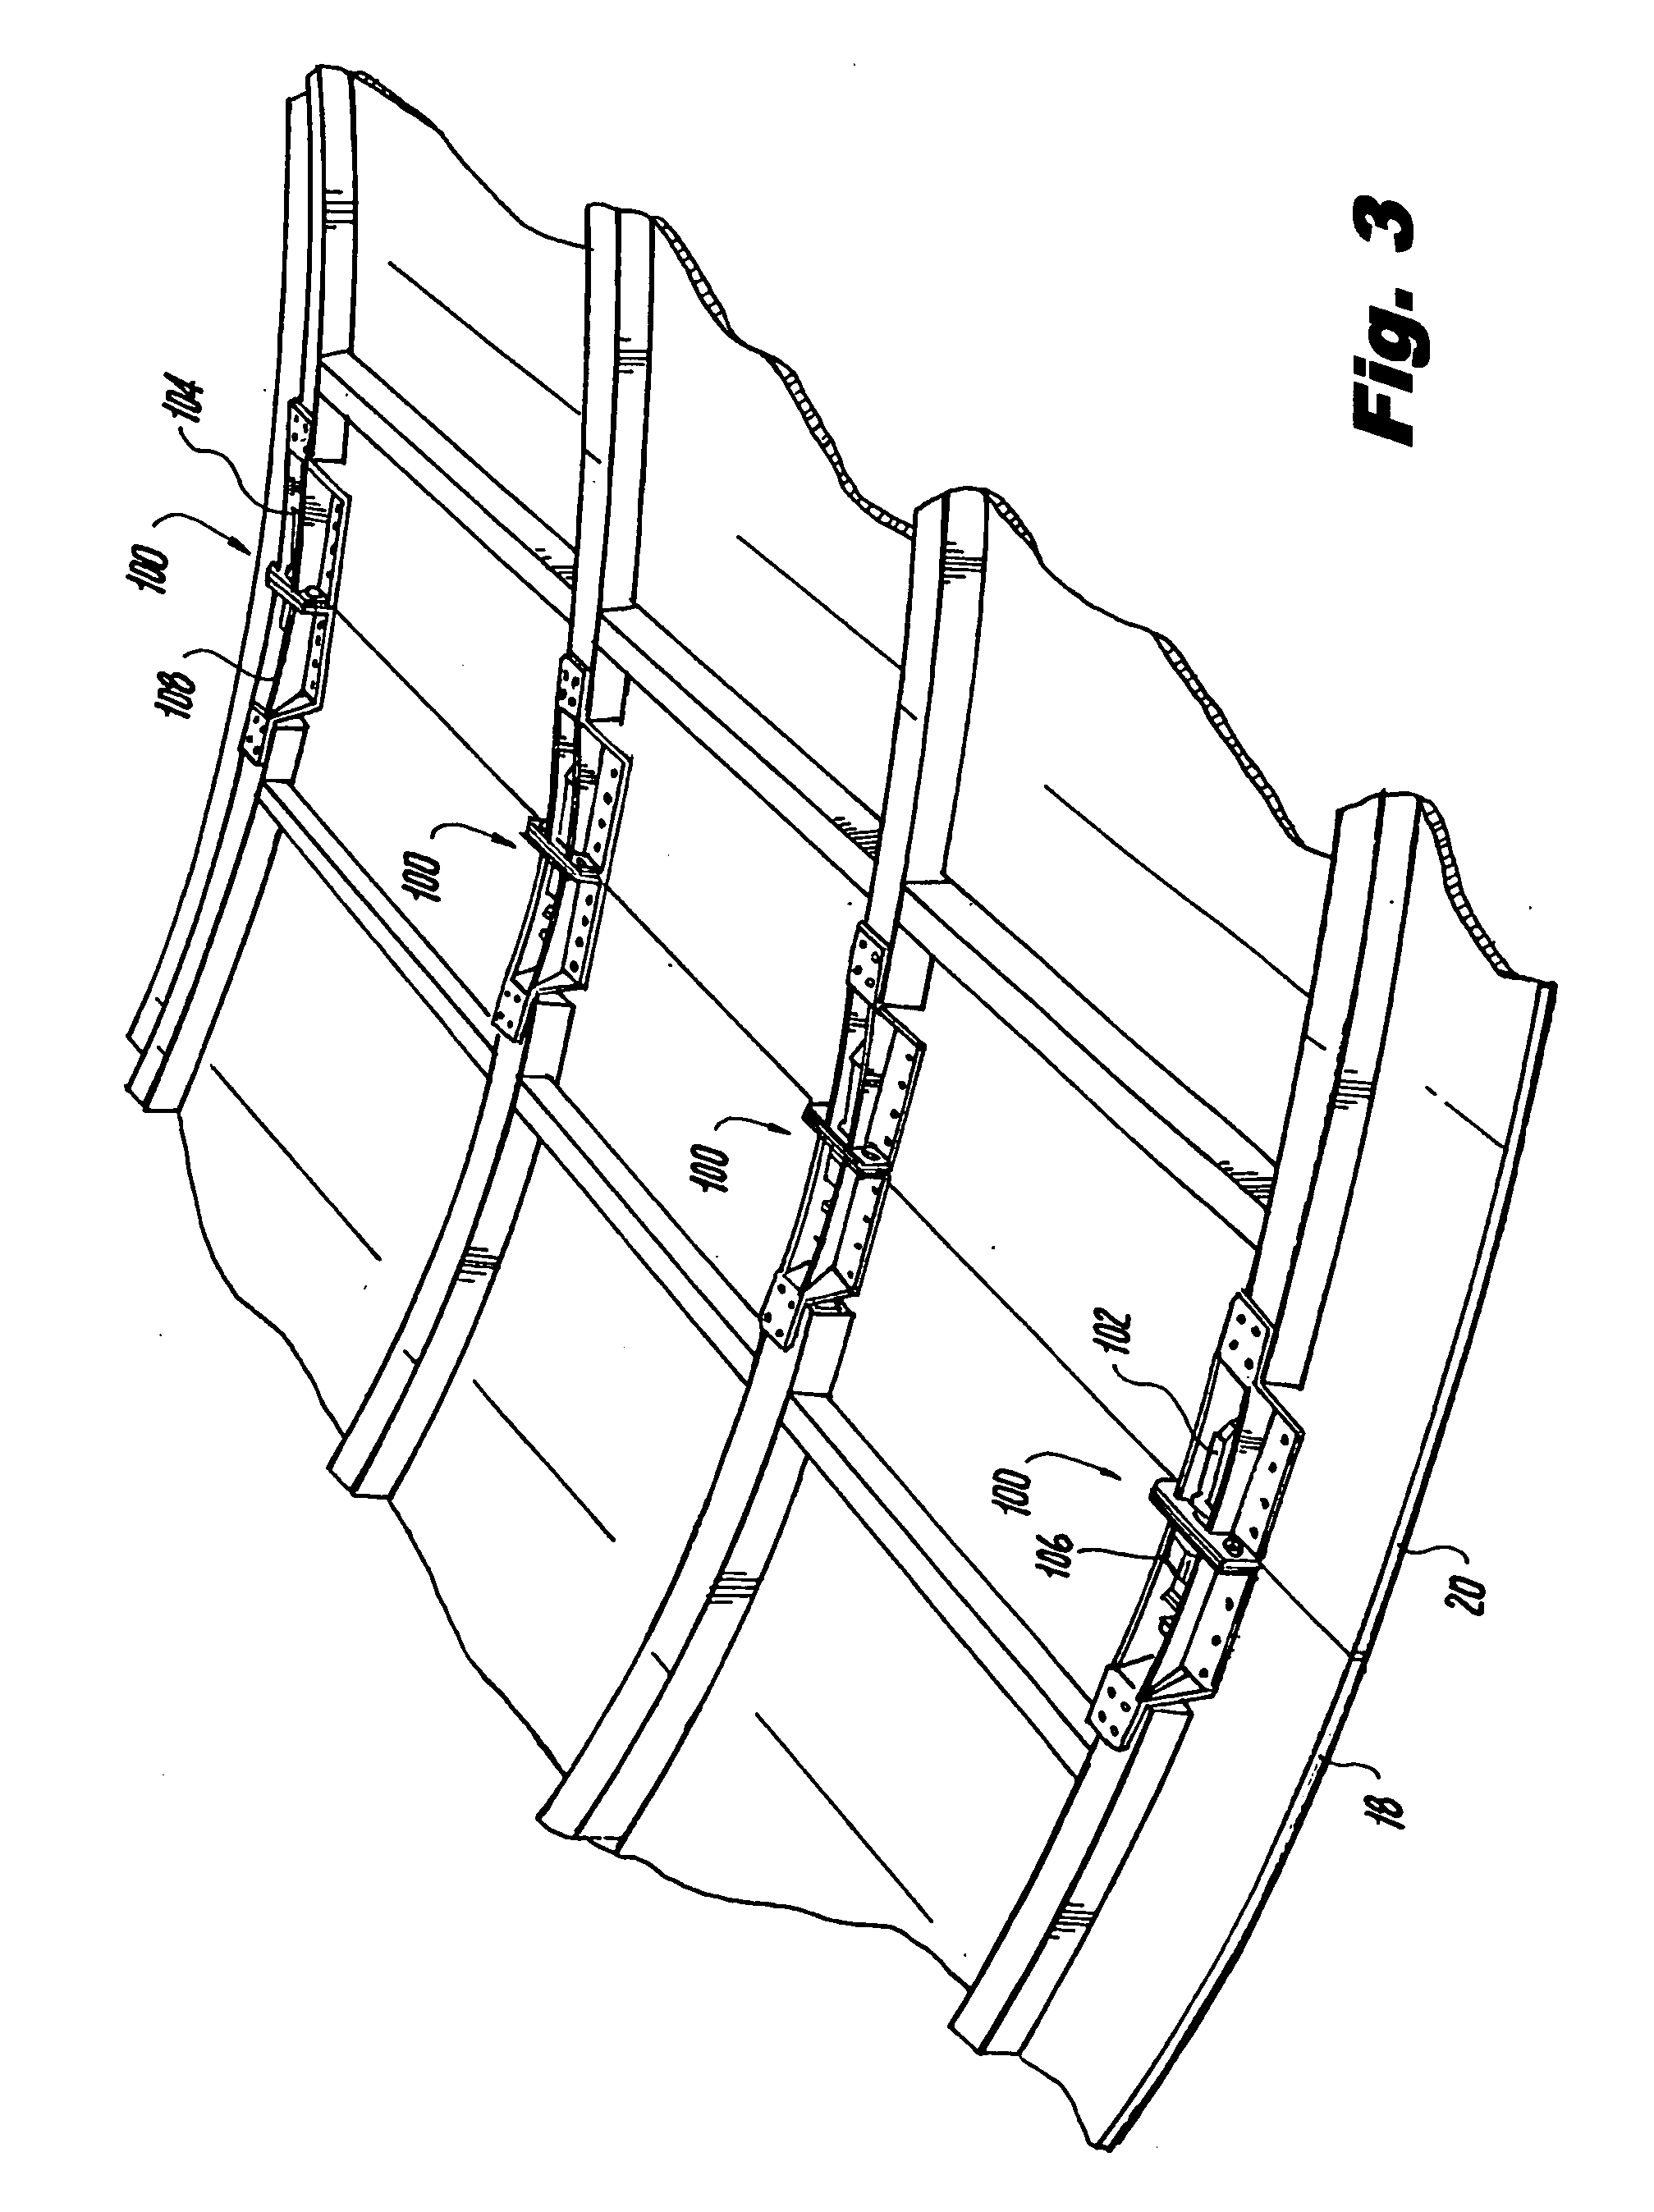 Method and component for determining load on a latch assembly